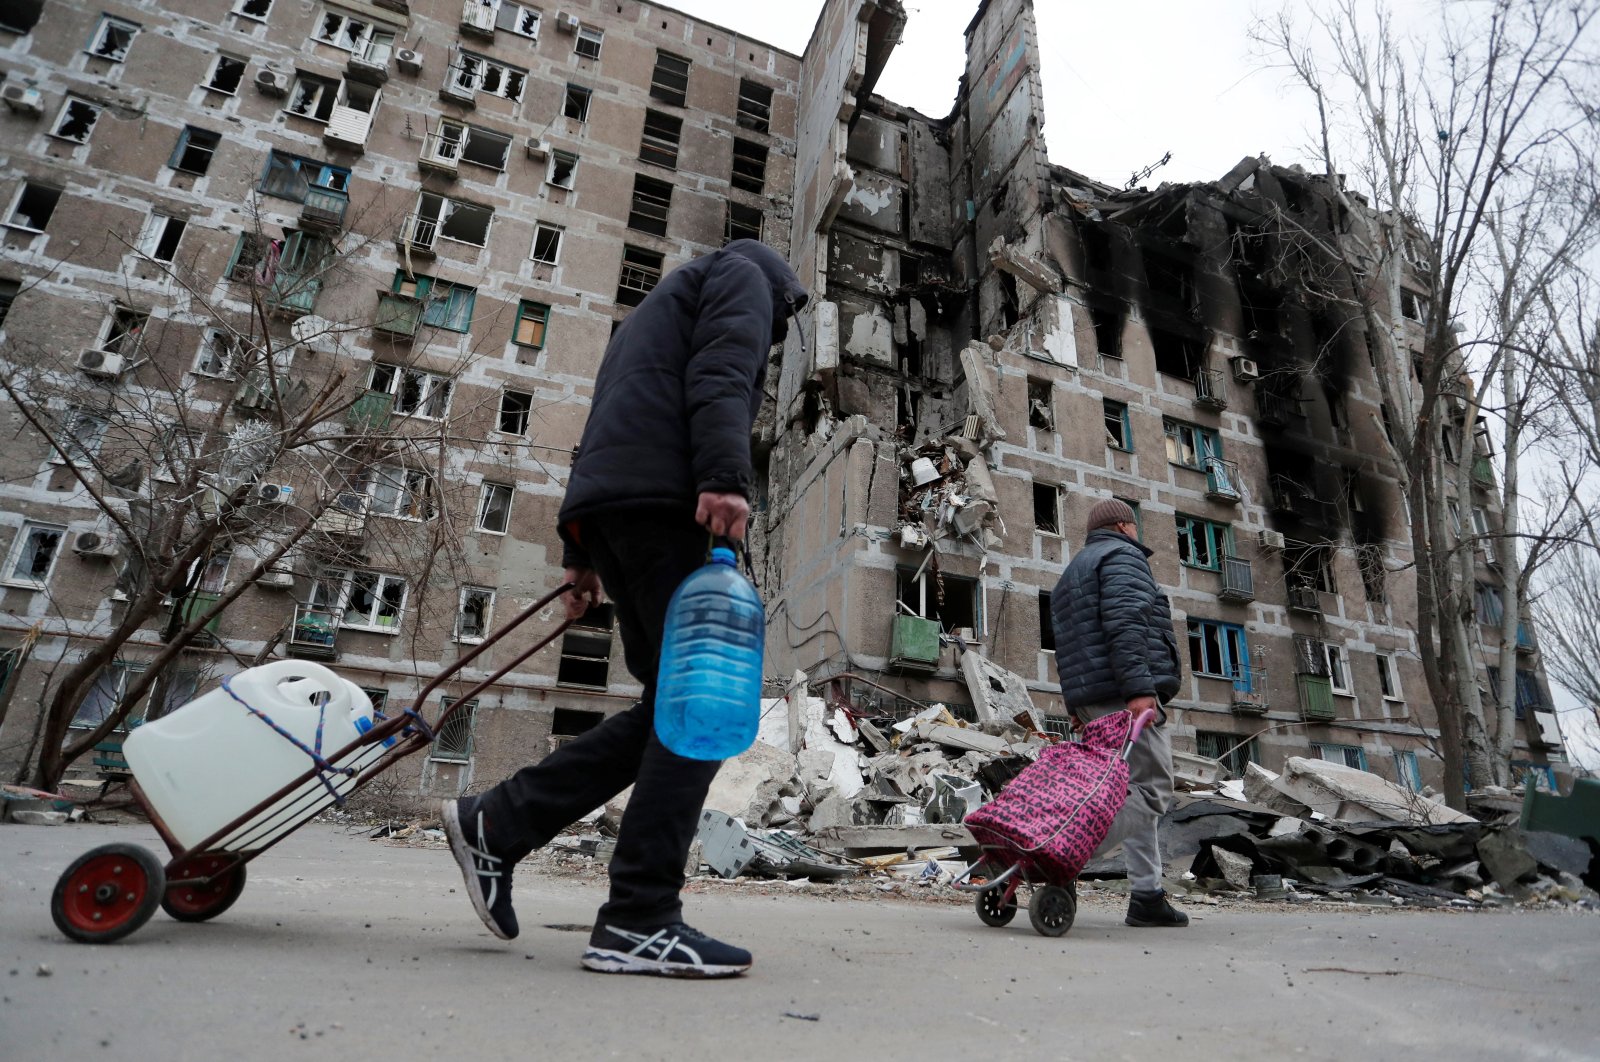 Local residents walk past an apartment building damaged during the Ukraine-Russia conflict in the southern port city of Mariupol, Ukraine, April 4, 2022. (REUTERS Photo)